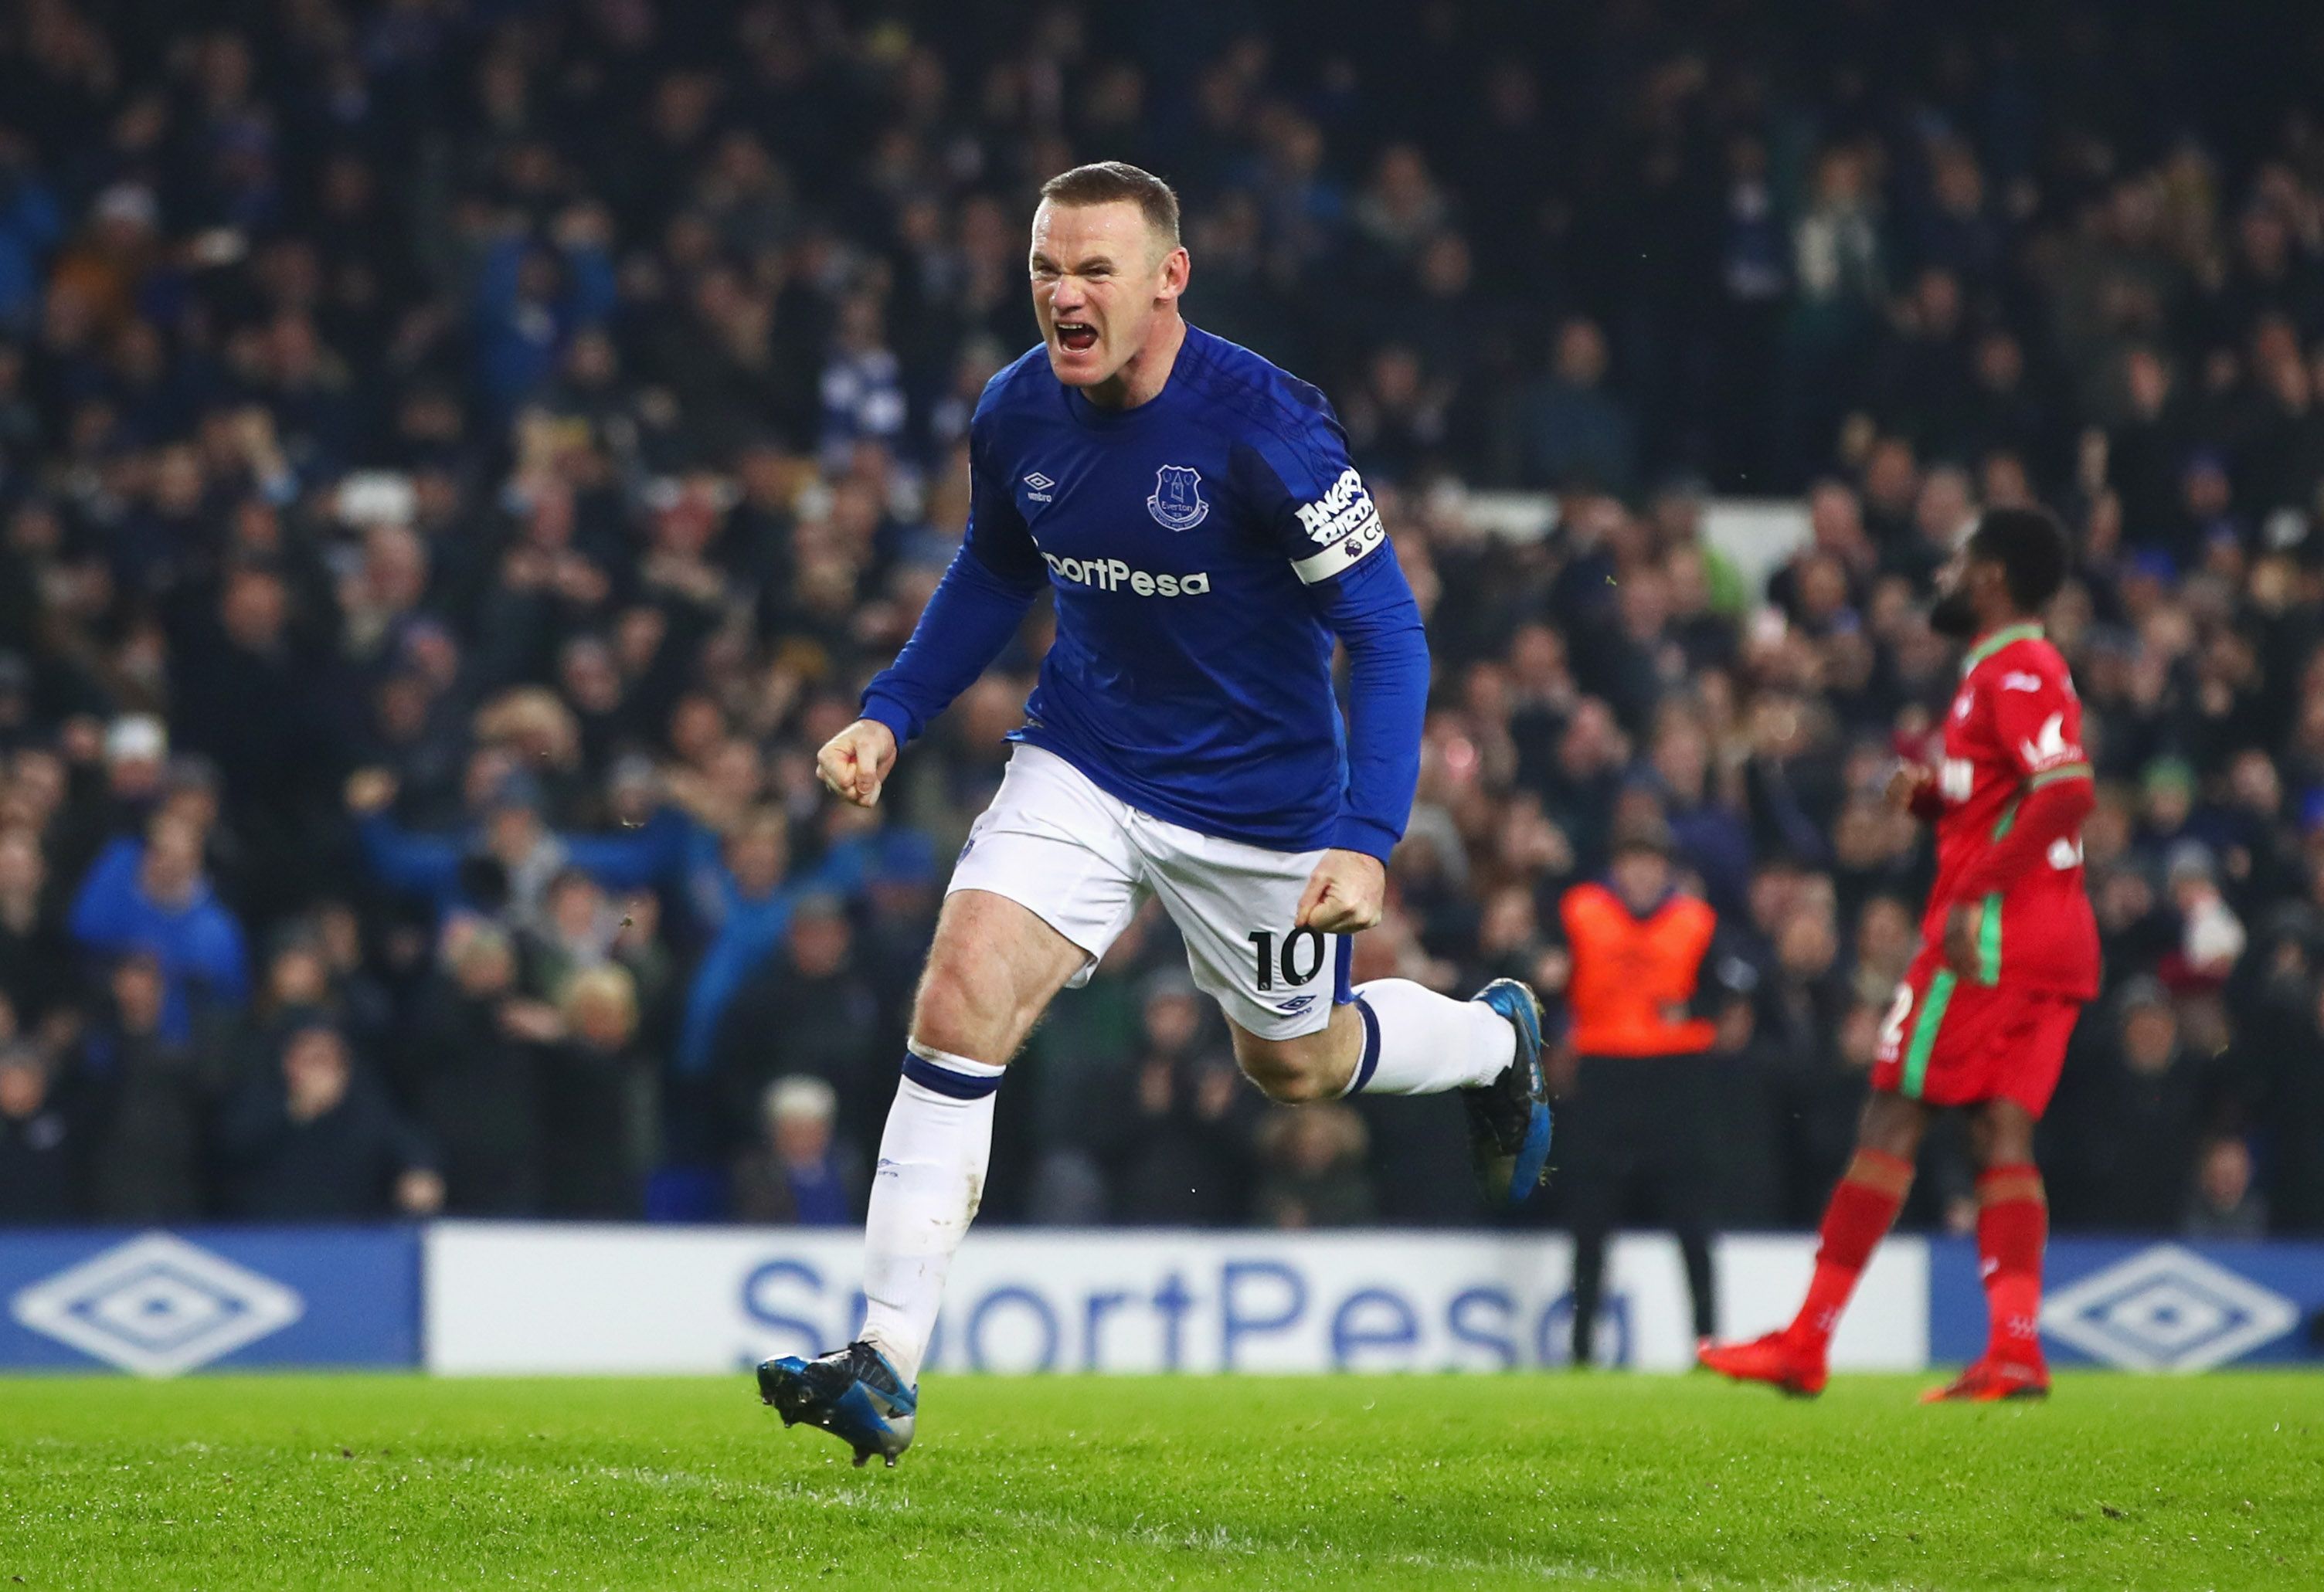 Wayne Rooney in action for Everton